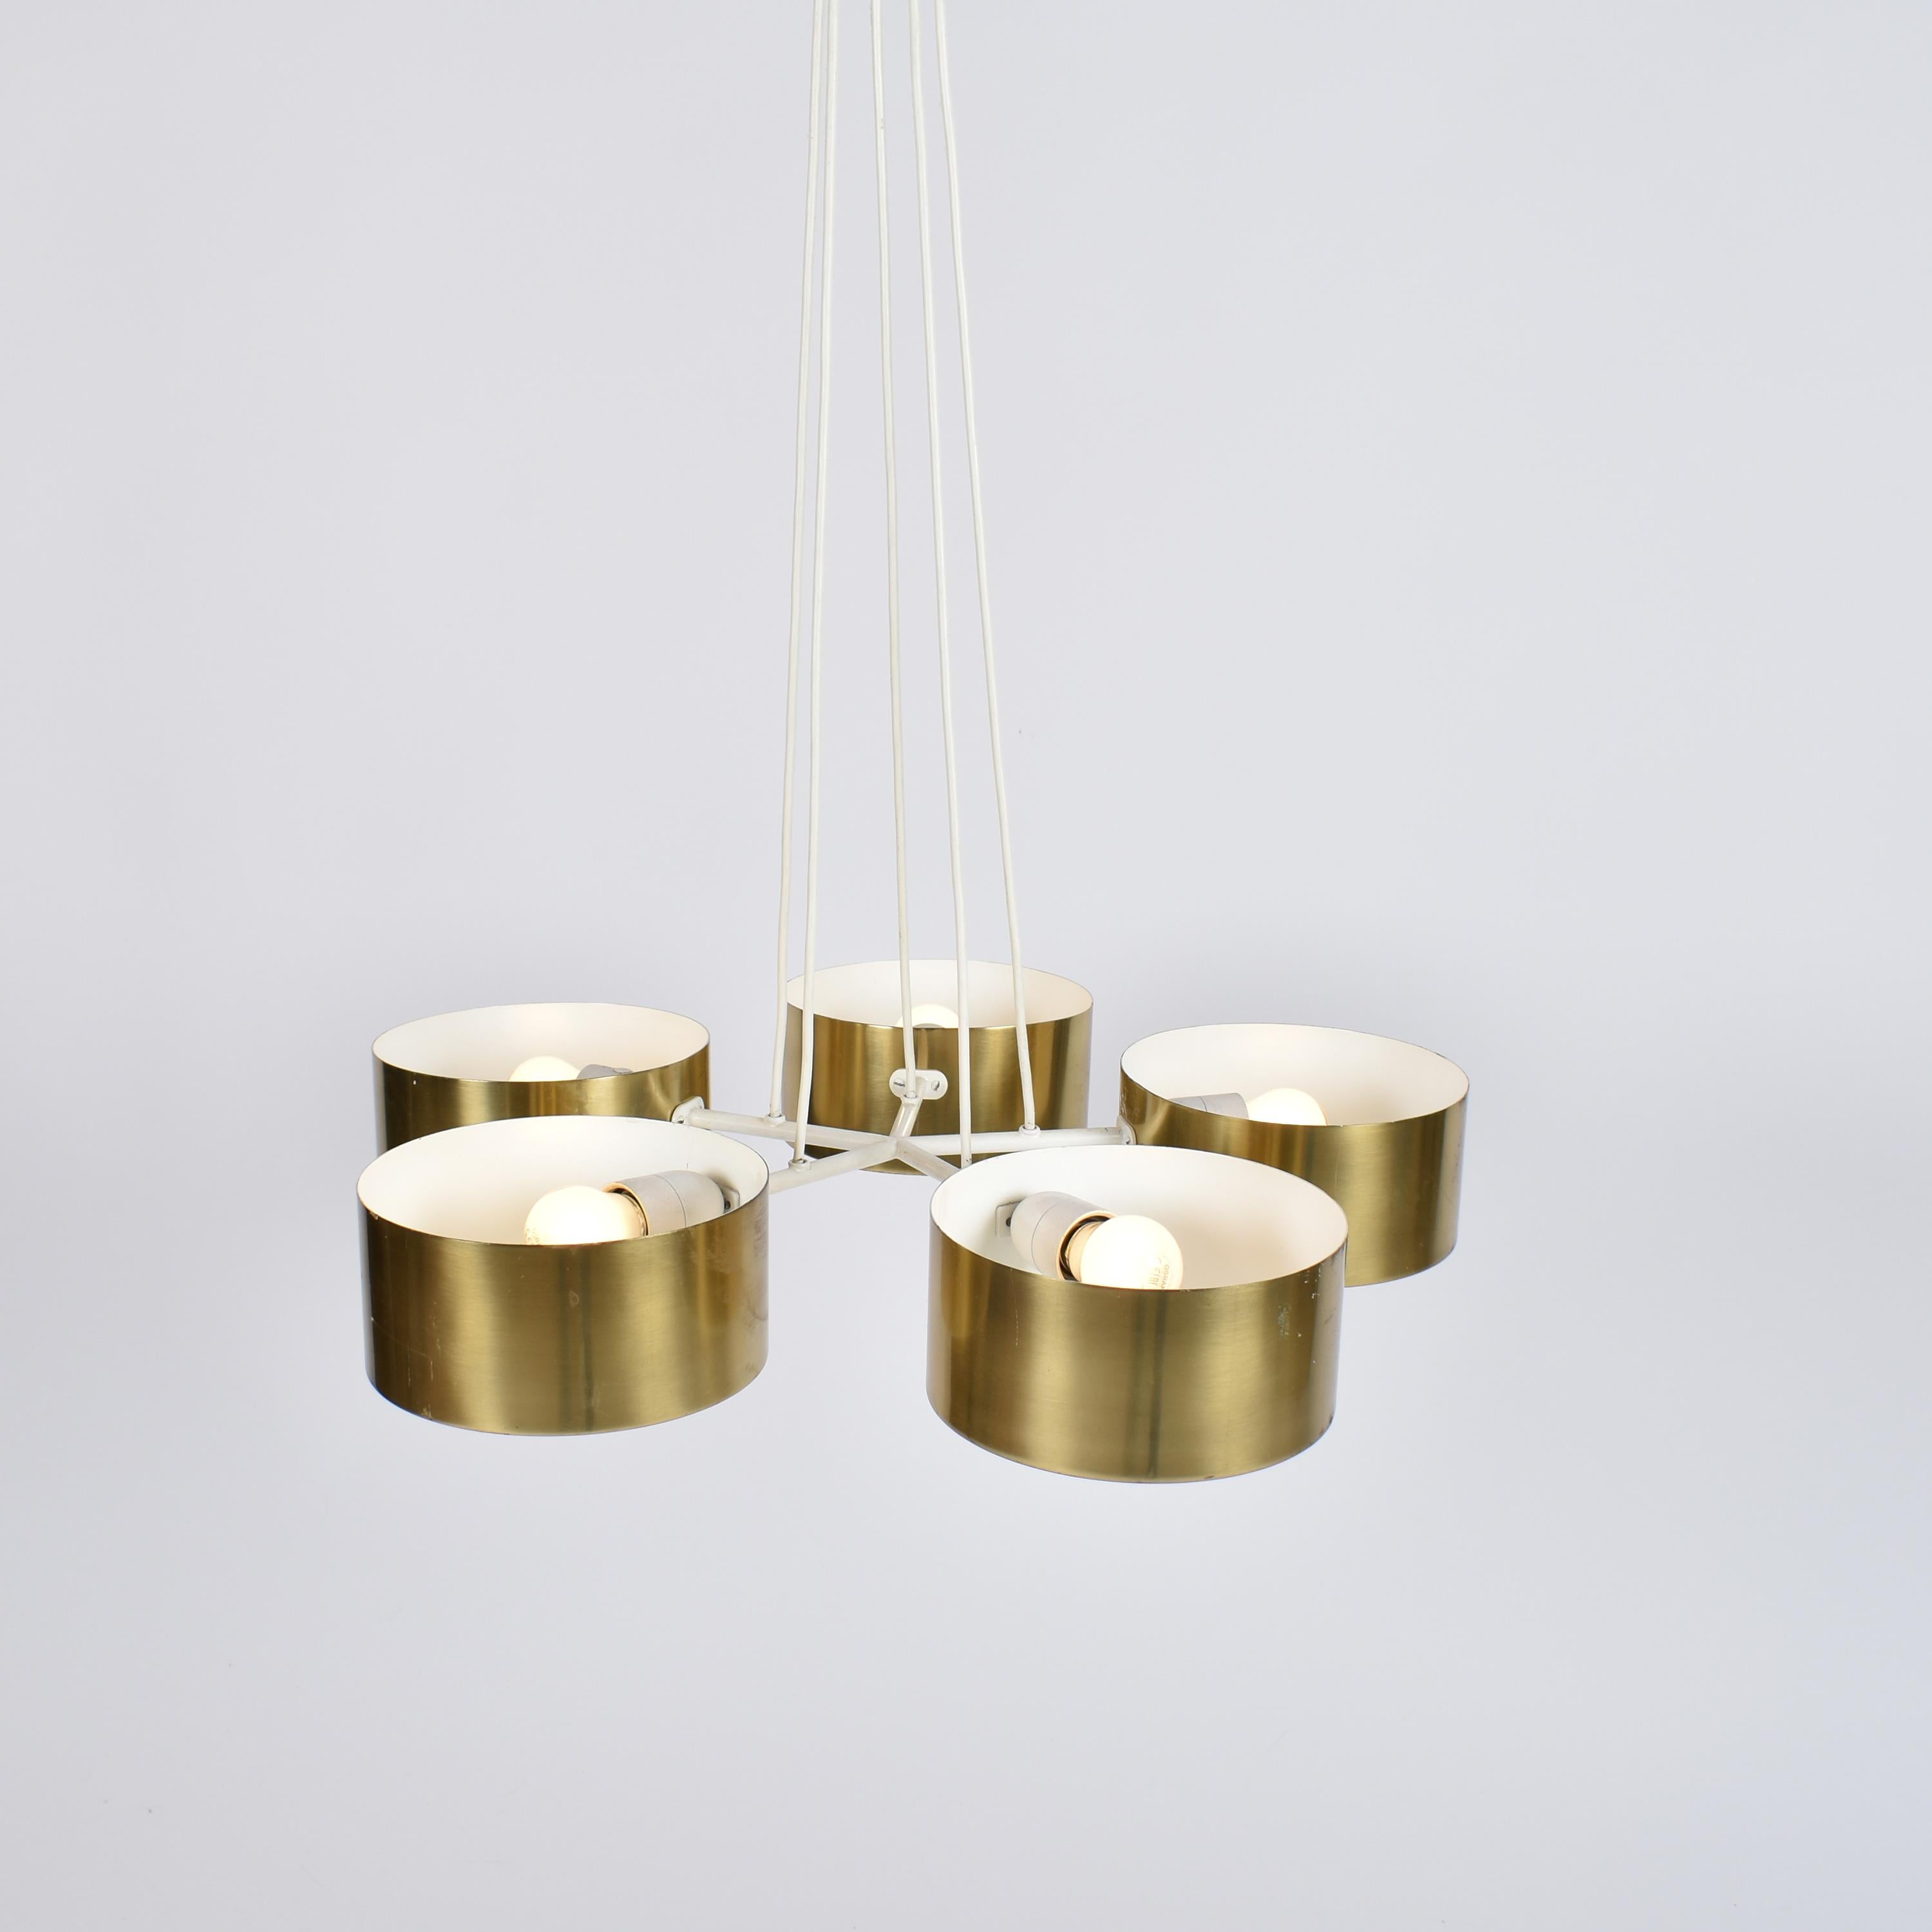 Large brass chandelier, made in Switzerland, around 1950.
Attributed to AMBA Basel, Alfred Müller's high end lighting company, based in Basel, Switzerland.
The five brass shades are connected to a white lacquered structure, wich is suspended to